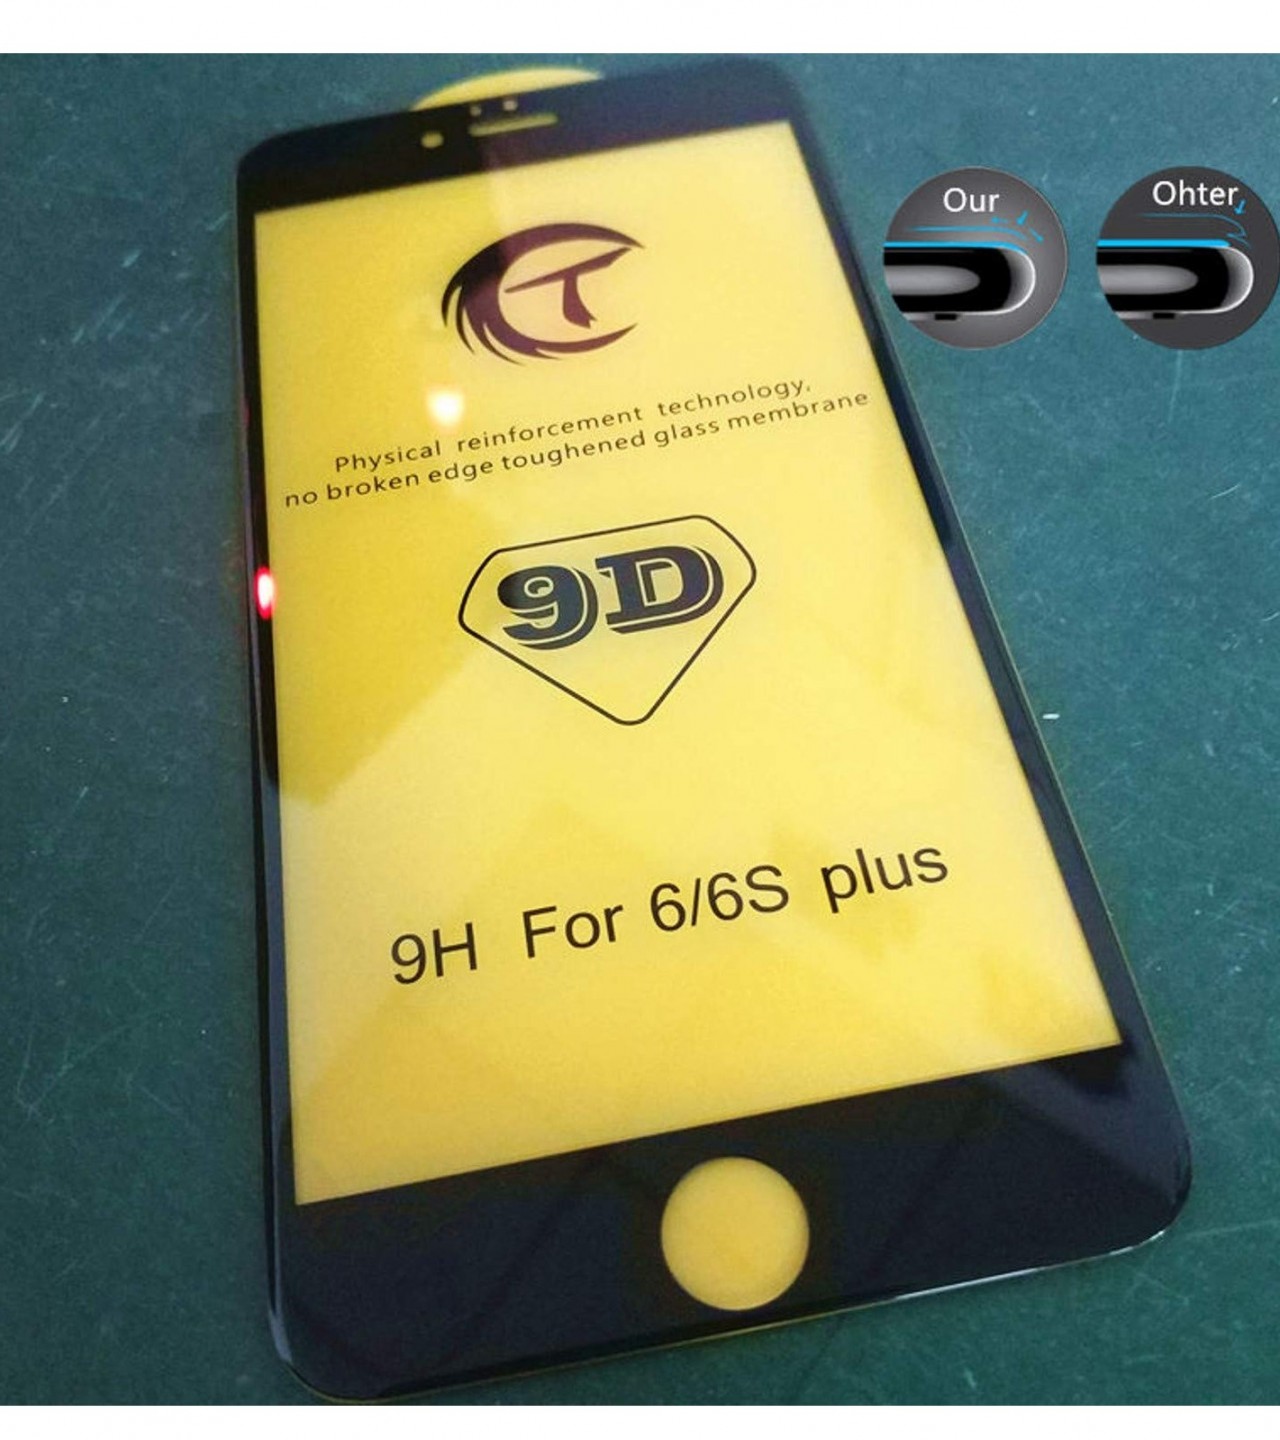 9D Full Cover Tempered Glass for  Iphone 6 plus  P103